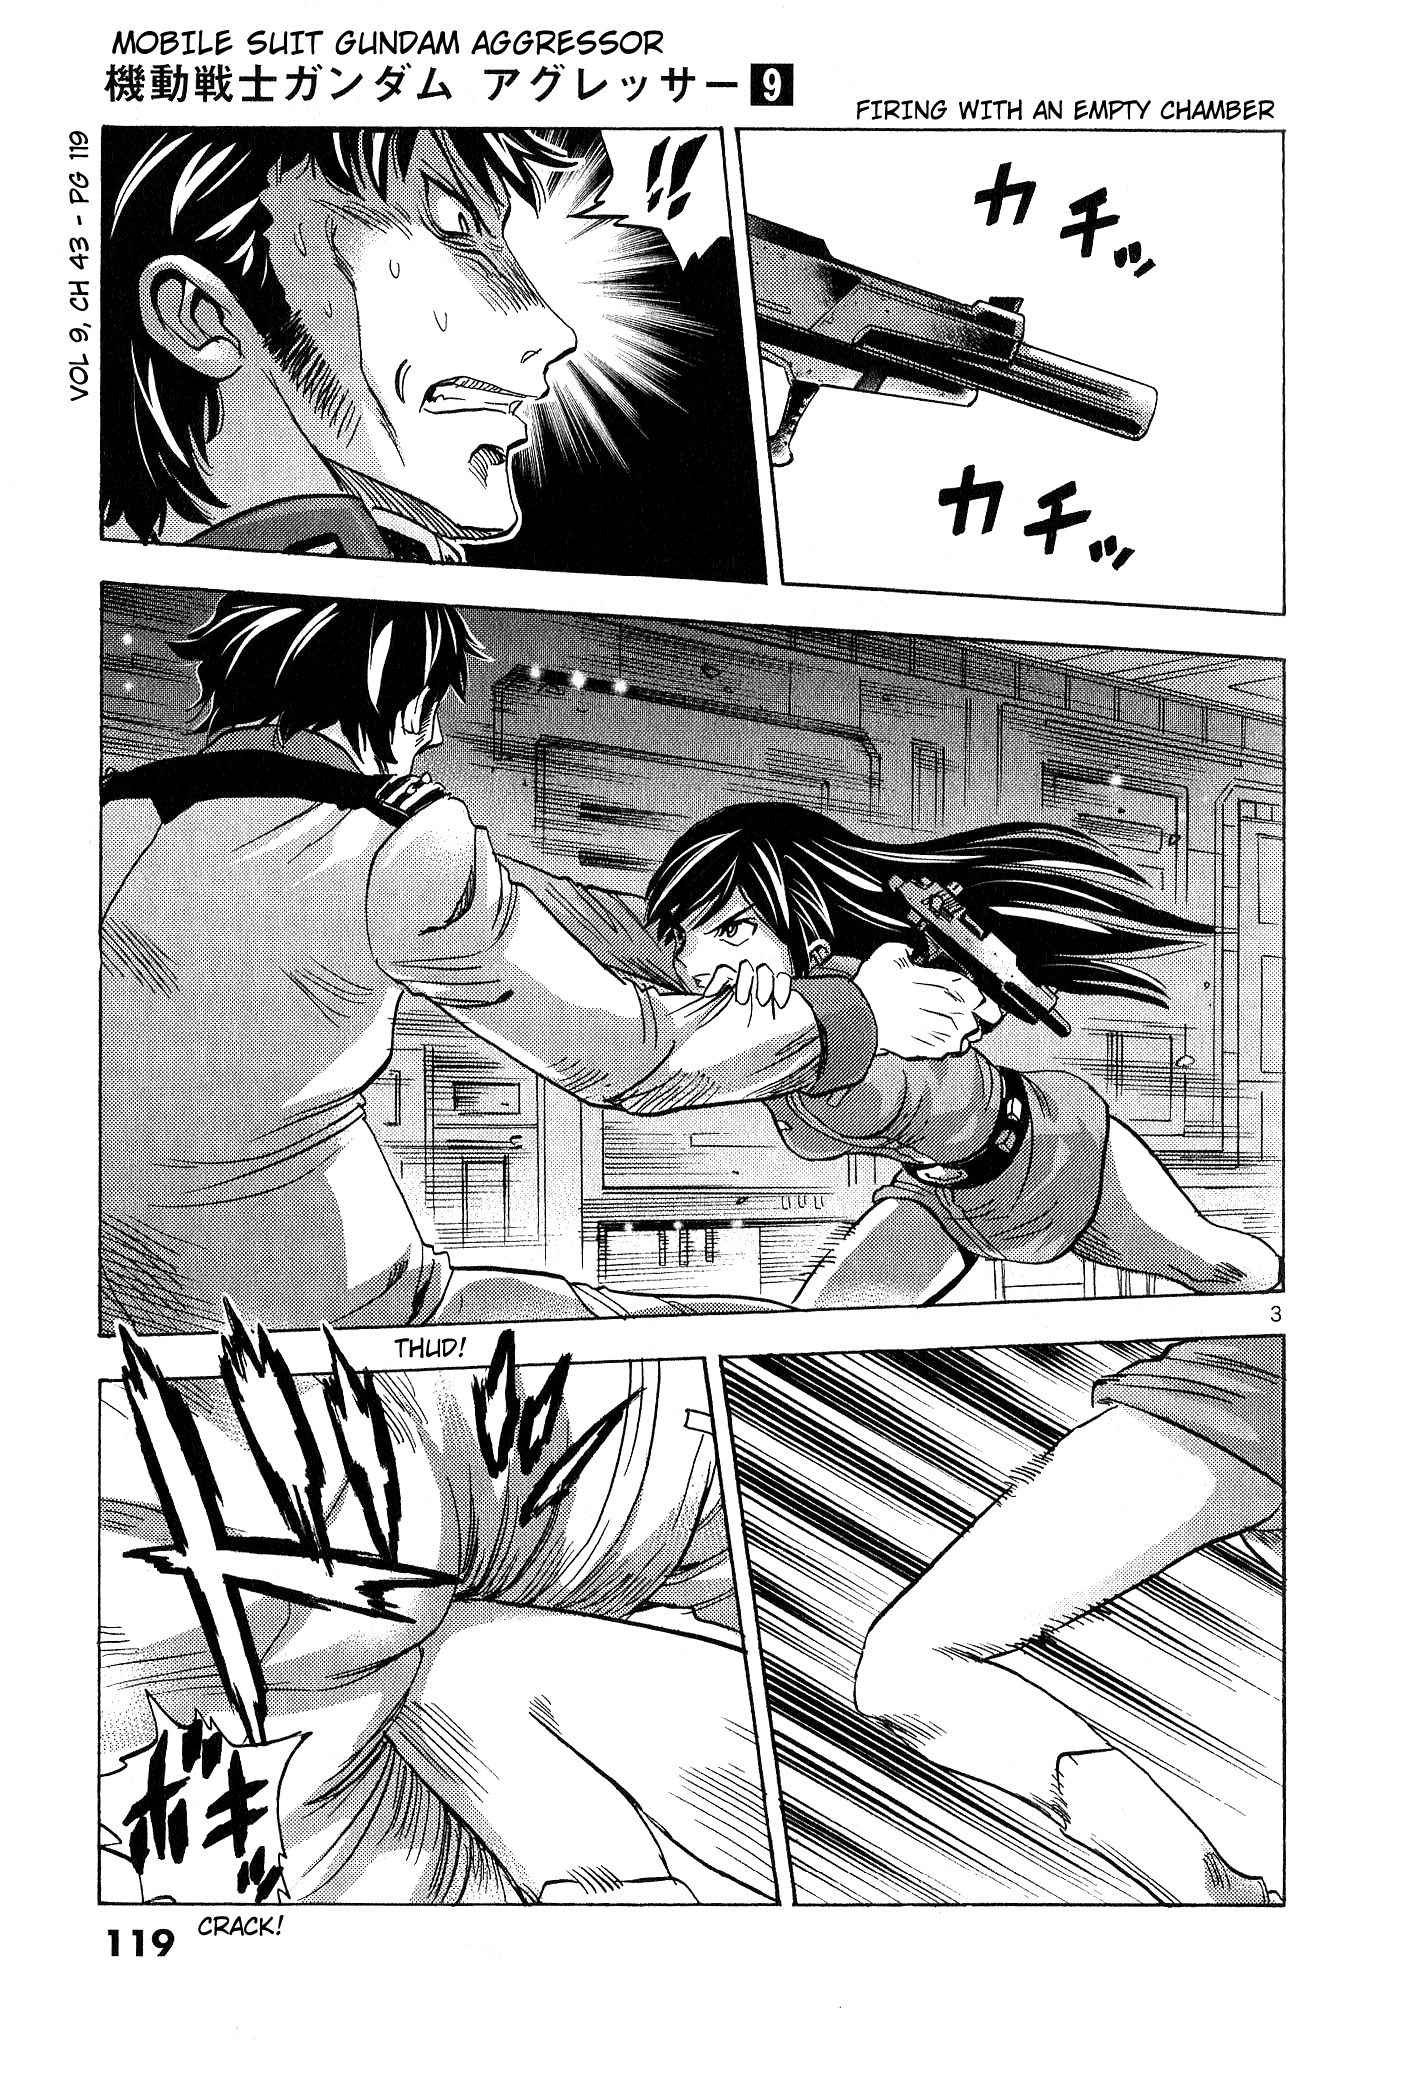 Mobile Suit Gundam Aggressor Vol.9 Chapter 43 - Picture 3